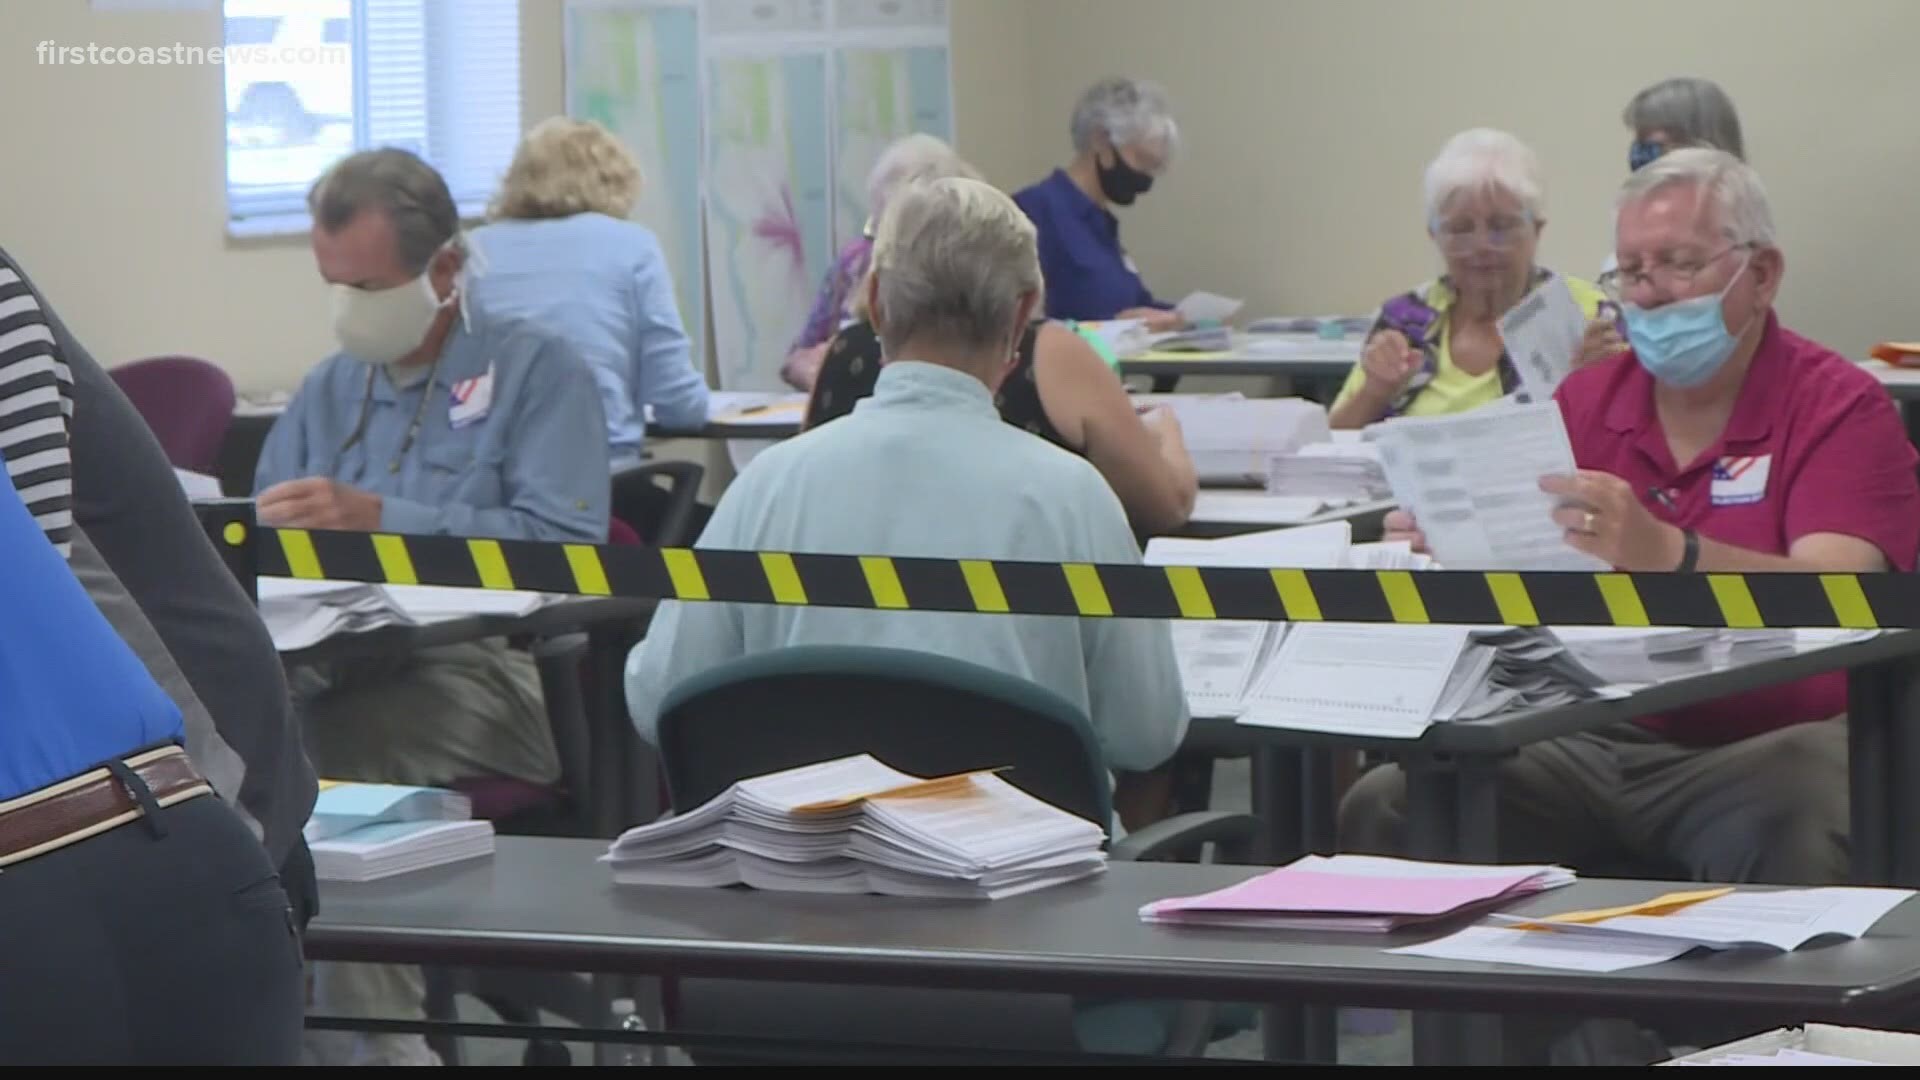 The polls open in St. Johns County at 8 a.m. Monday, with a record turnout expected for early voting.